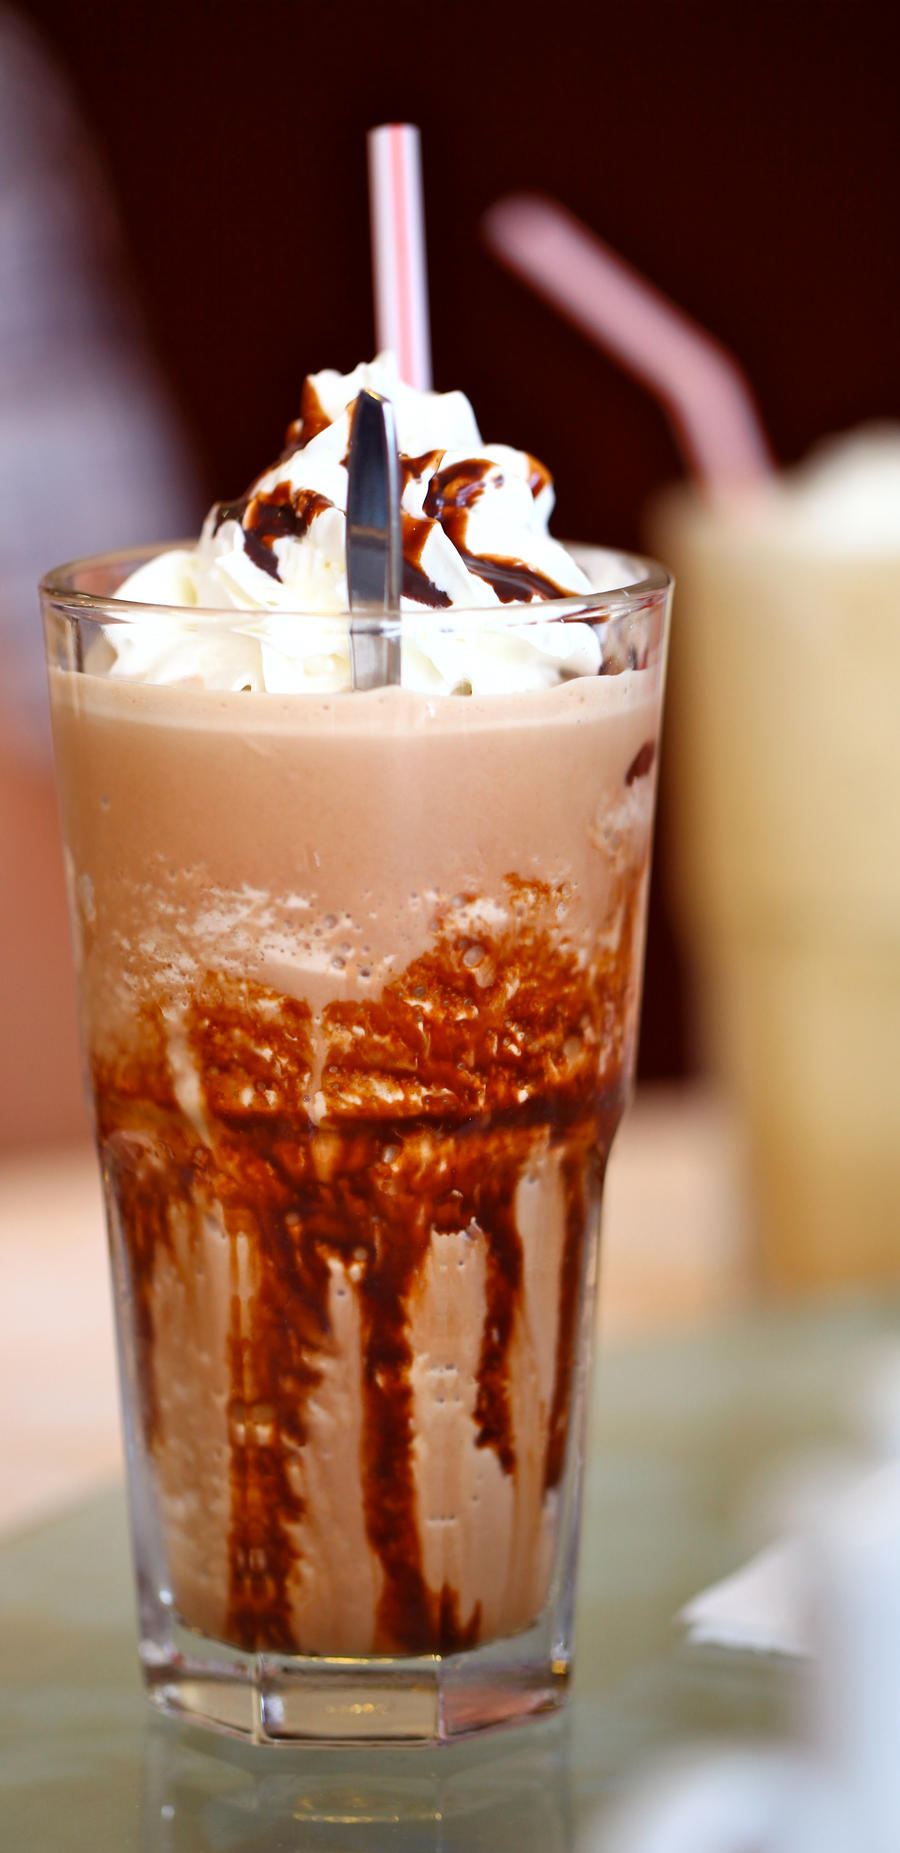 ice-blended chocolate..